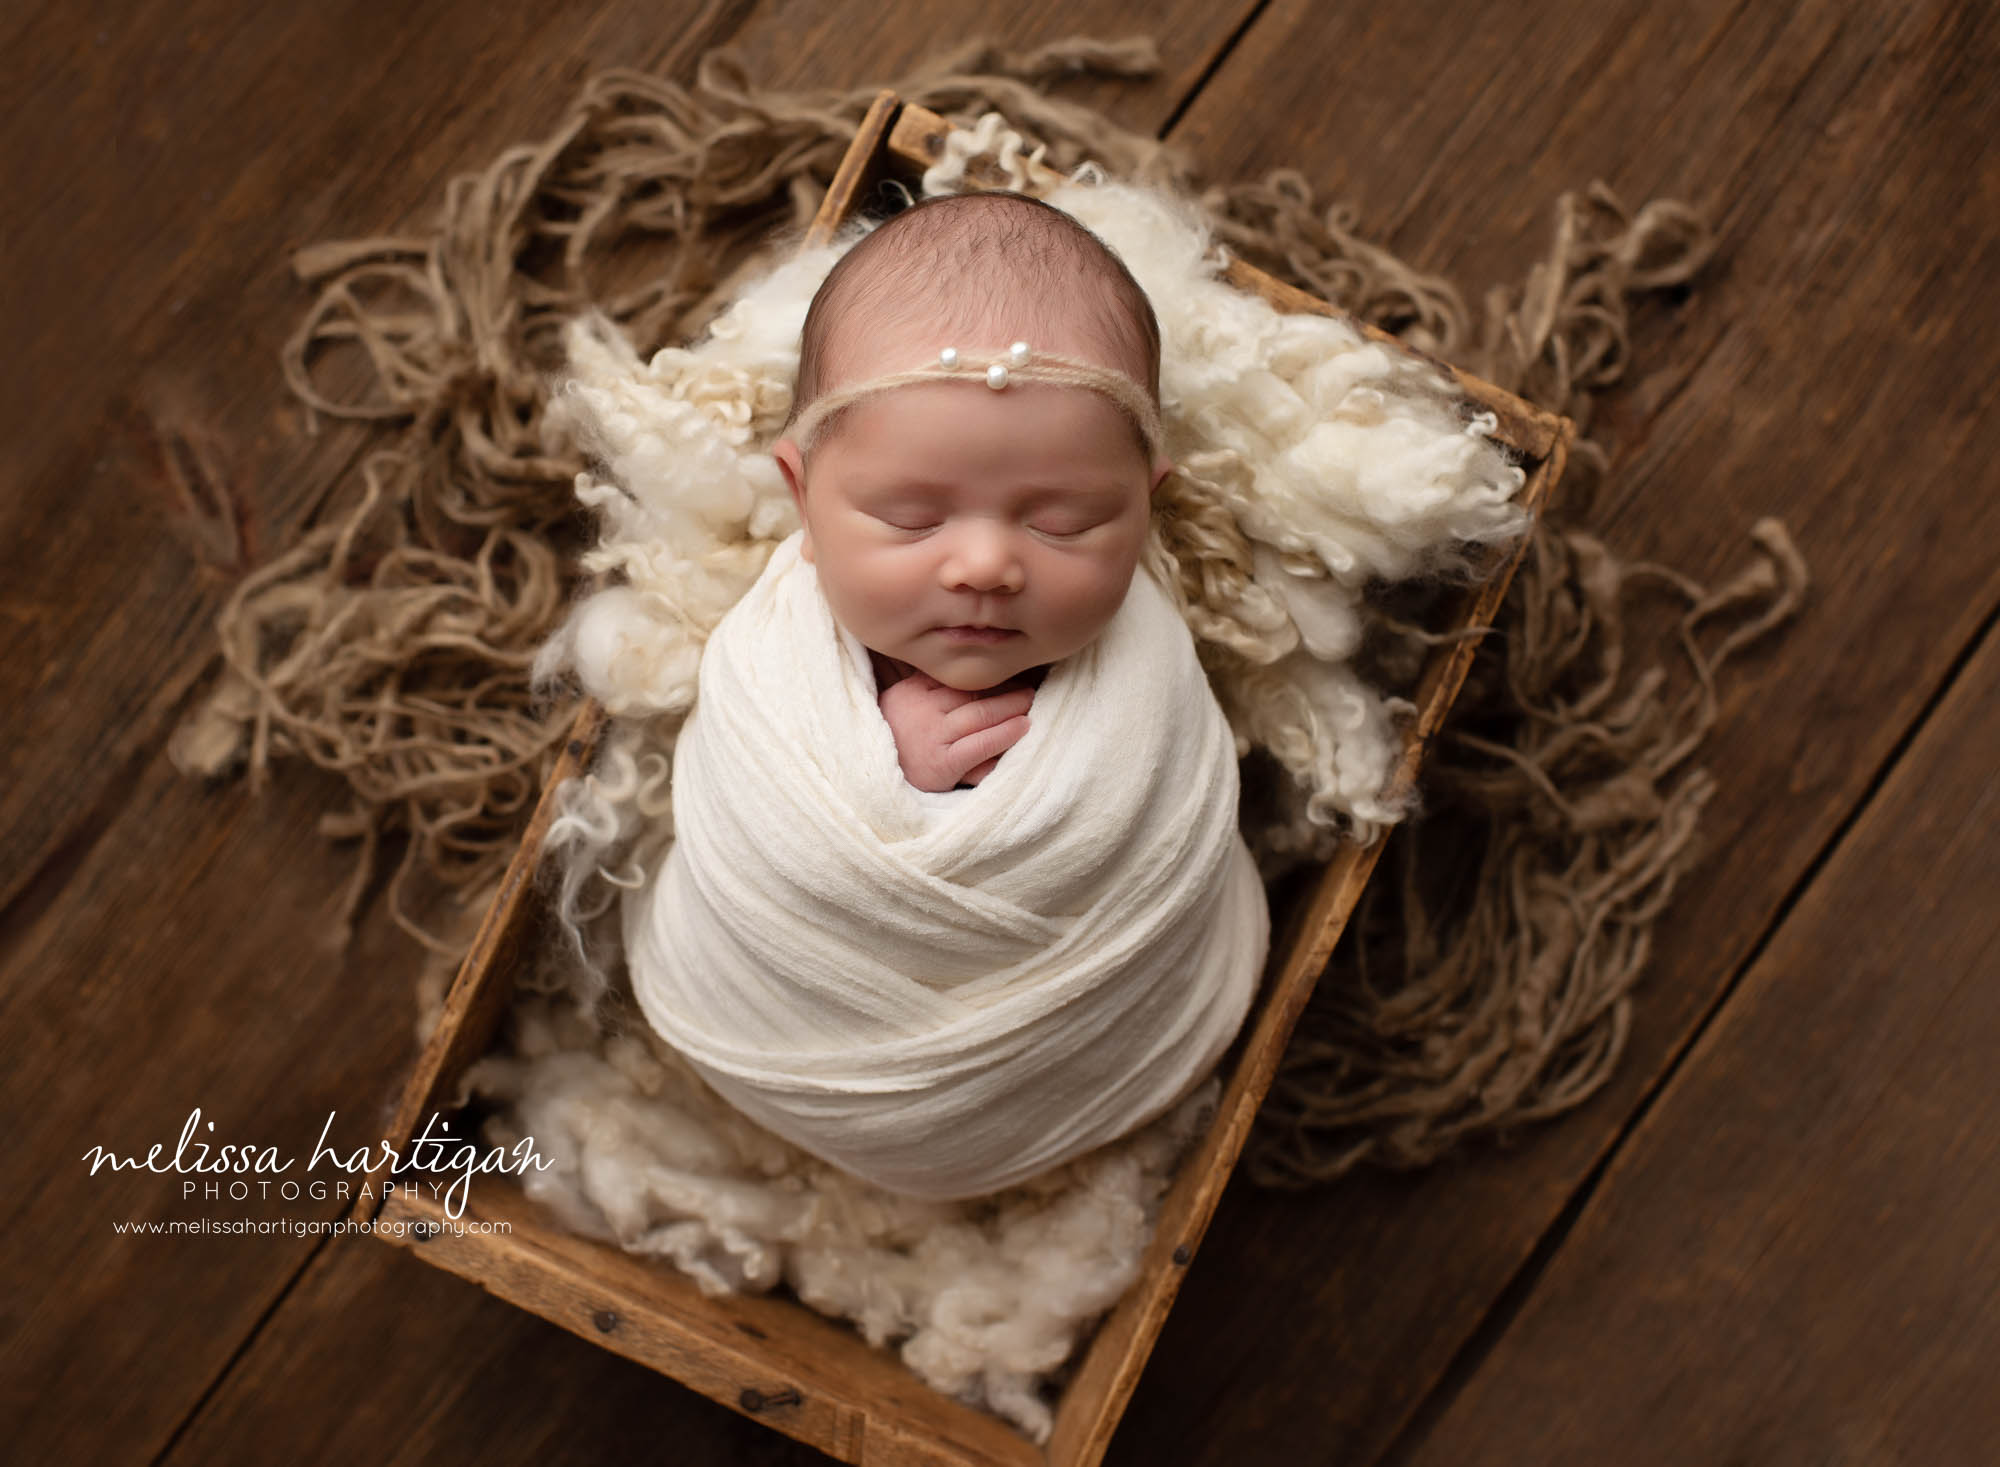 baby girl posed on back with cream colored wrap in wooden crate